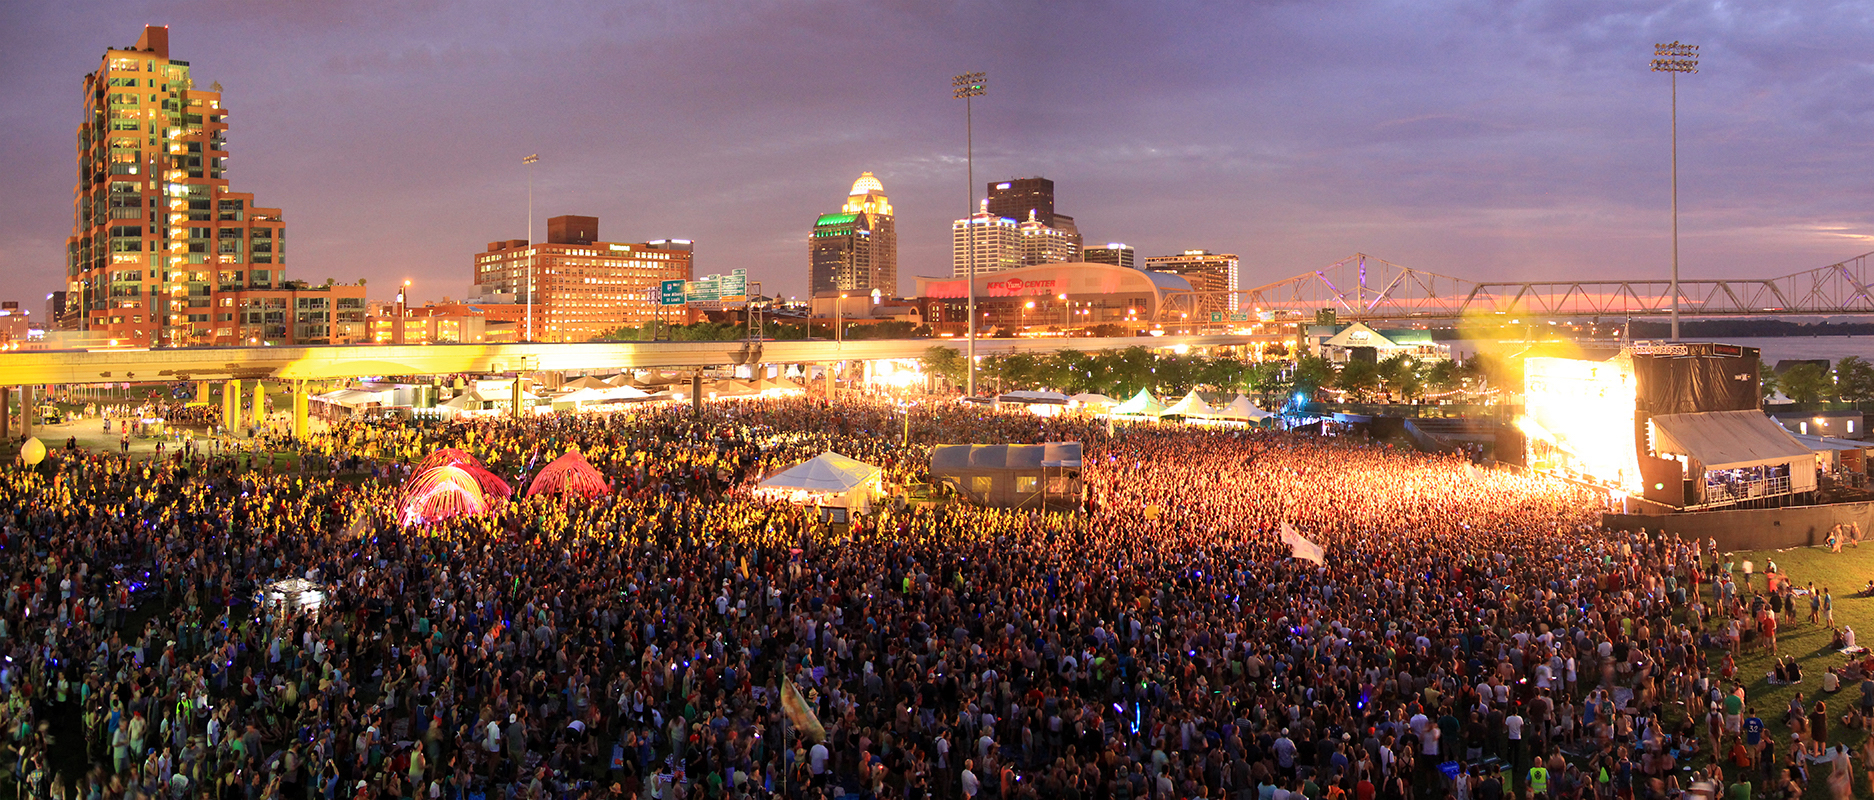 Arial view of the Forecastle Festival